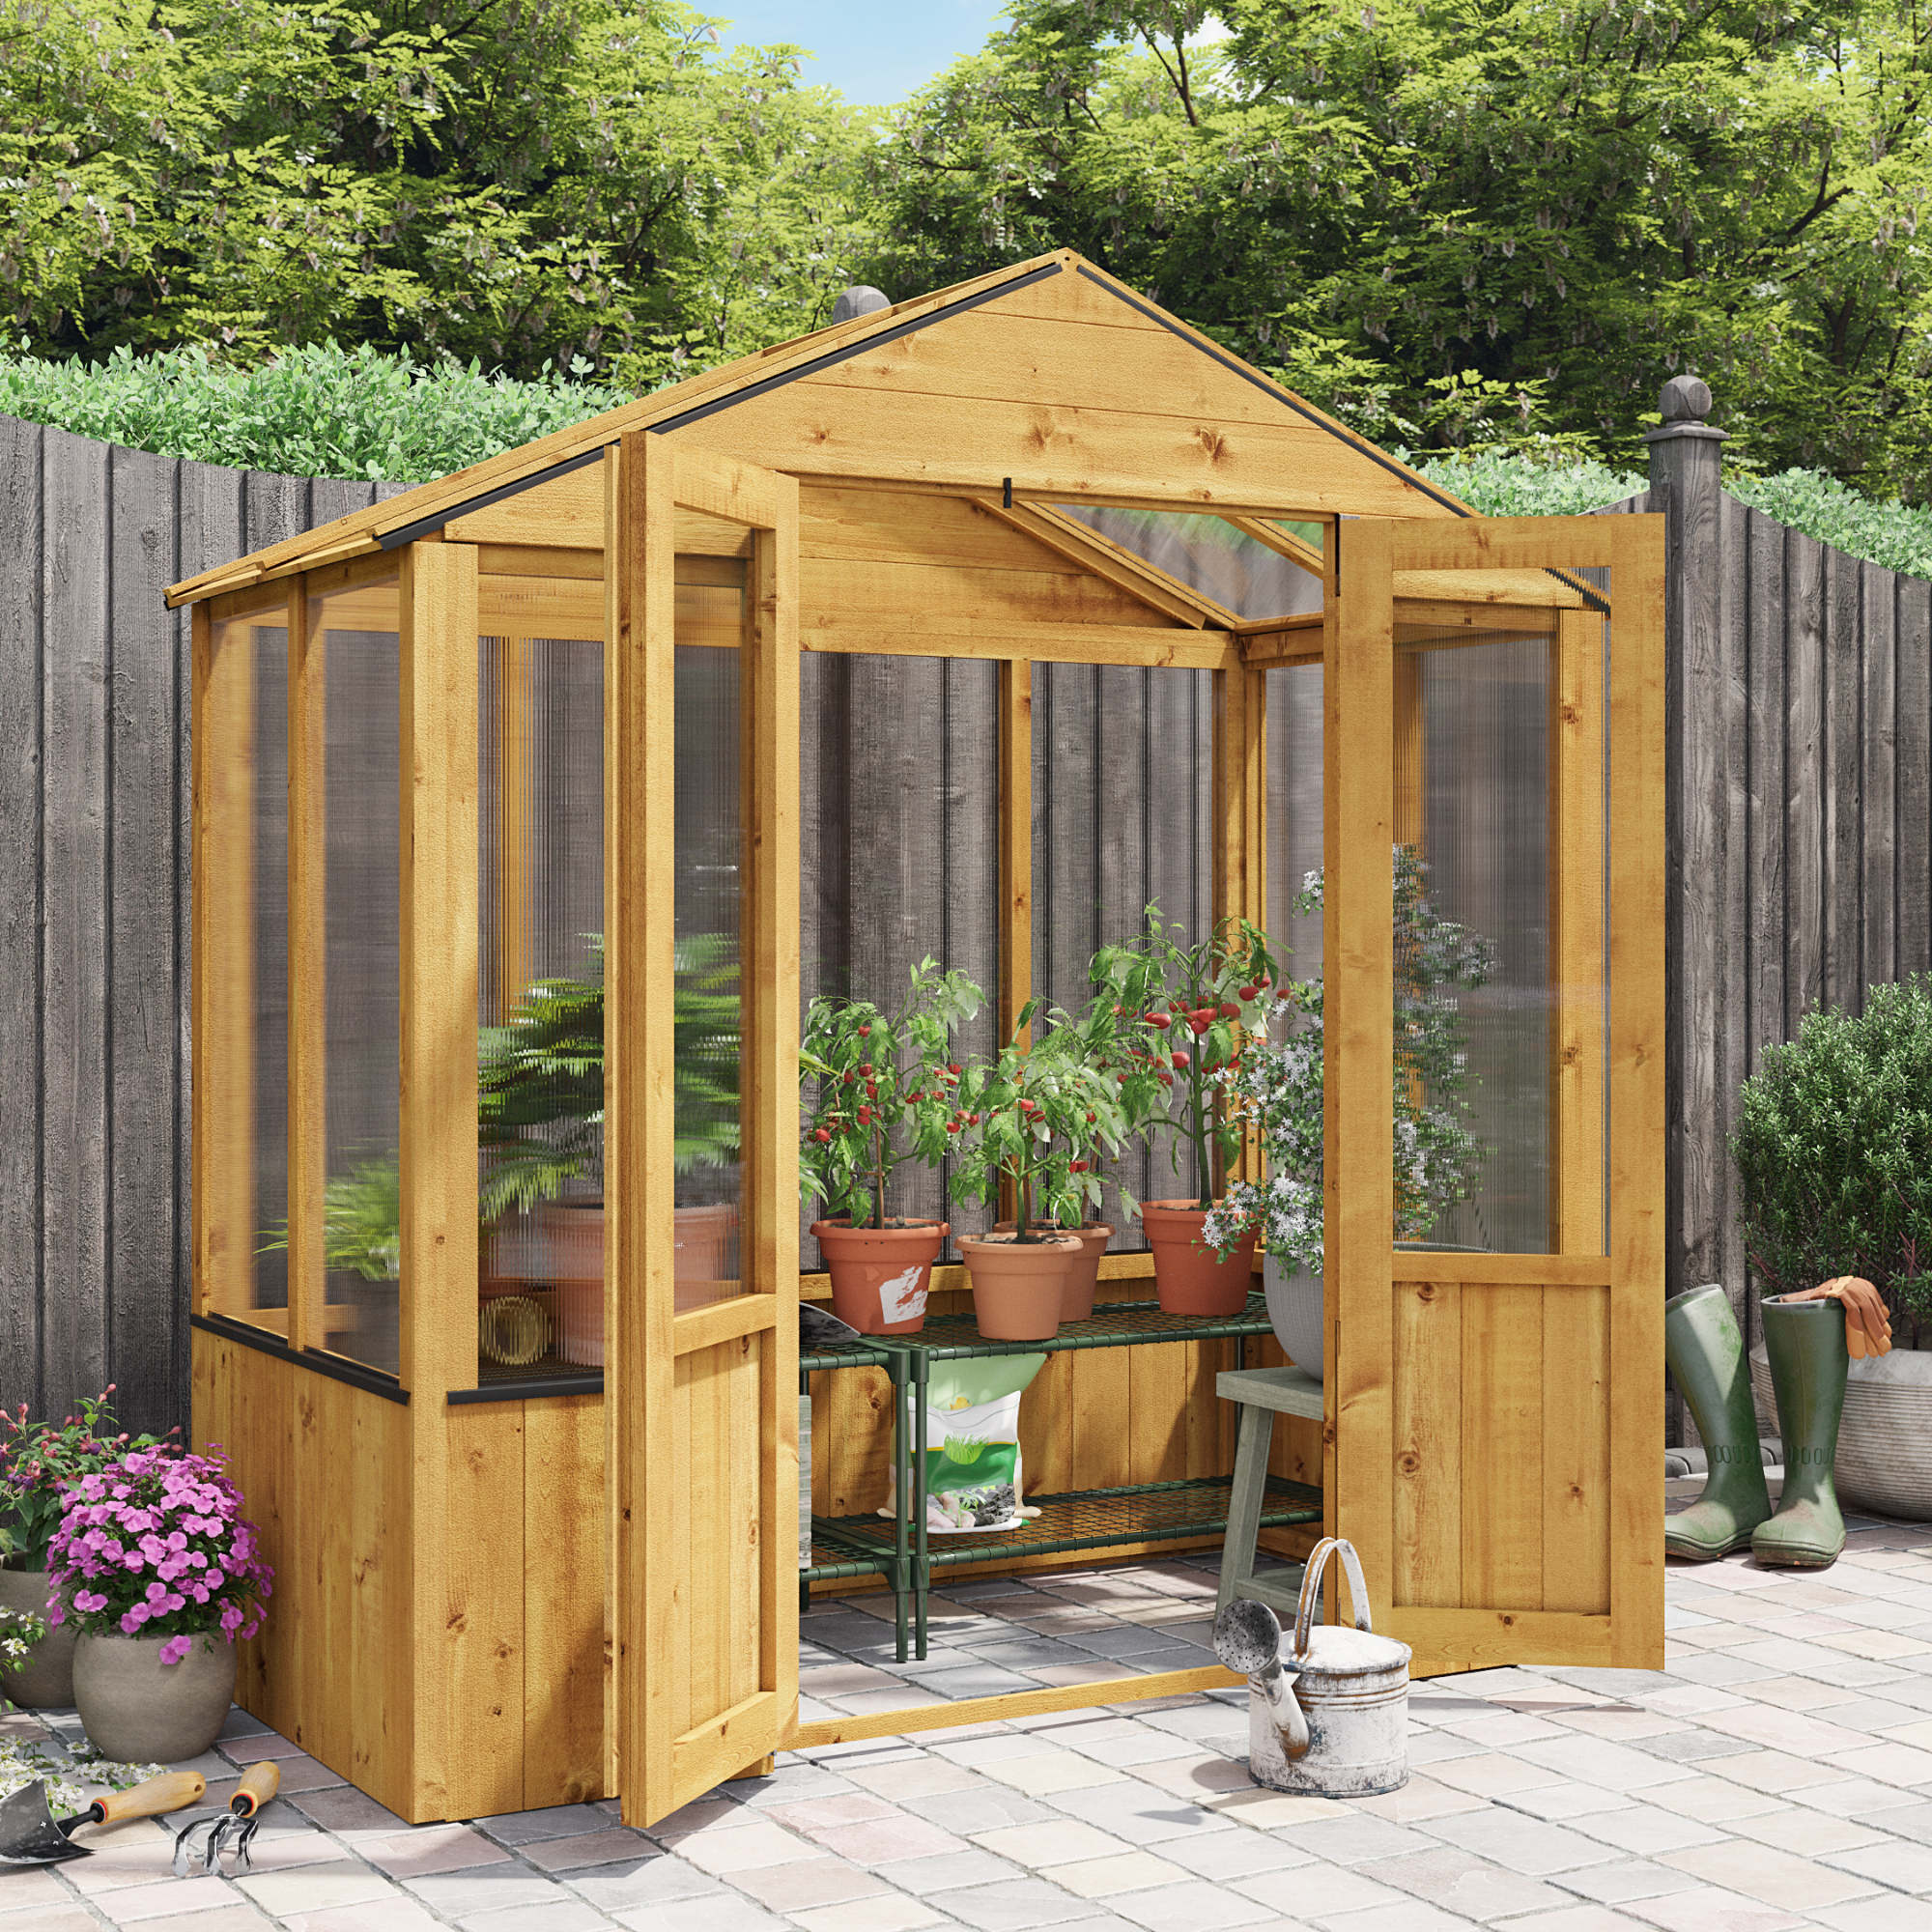 3x6 Wooden Polycarbonate Greenhouse | BillyOh 4000 Lincoln